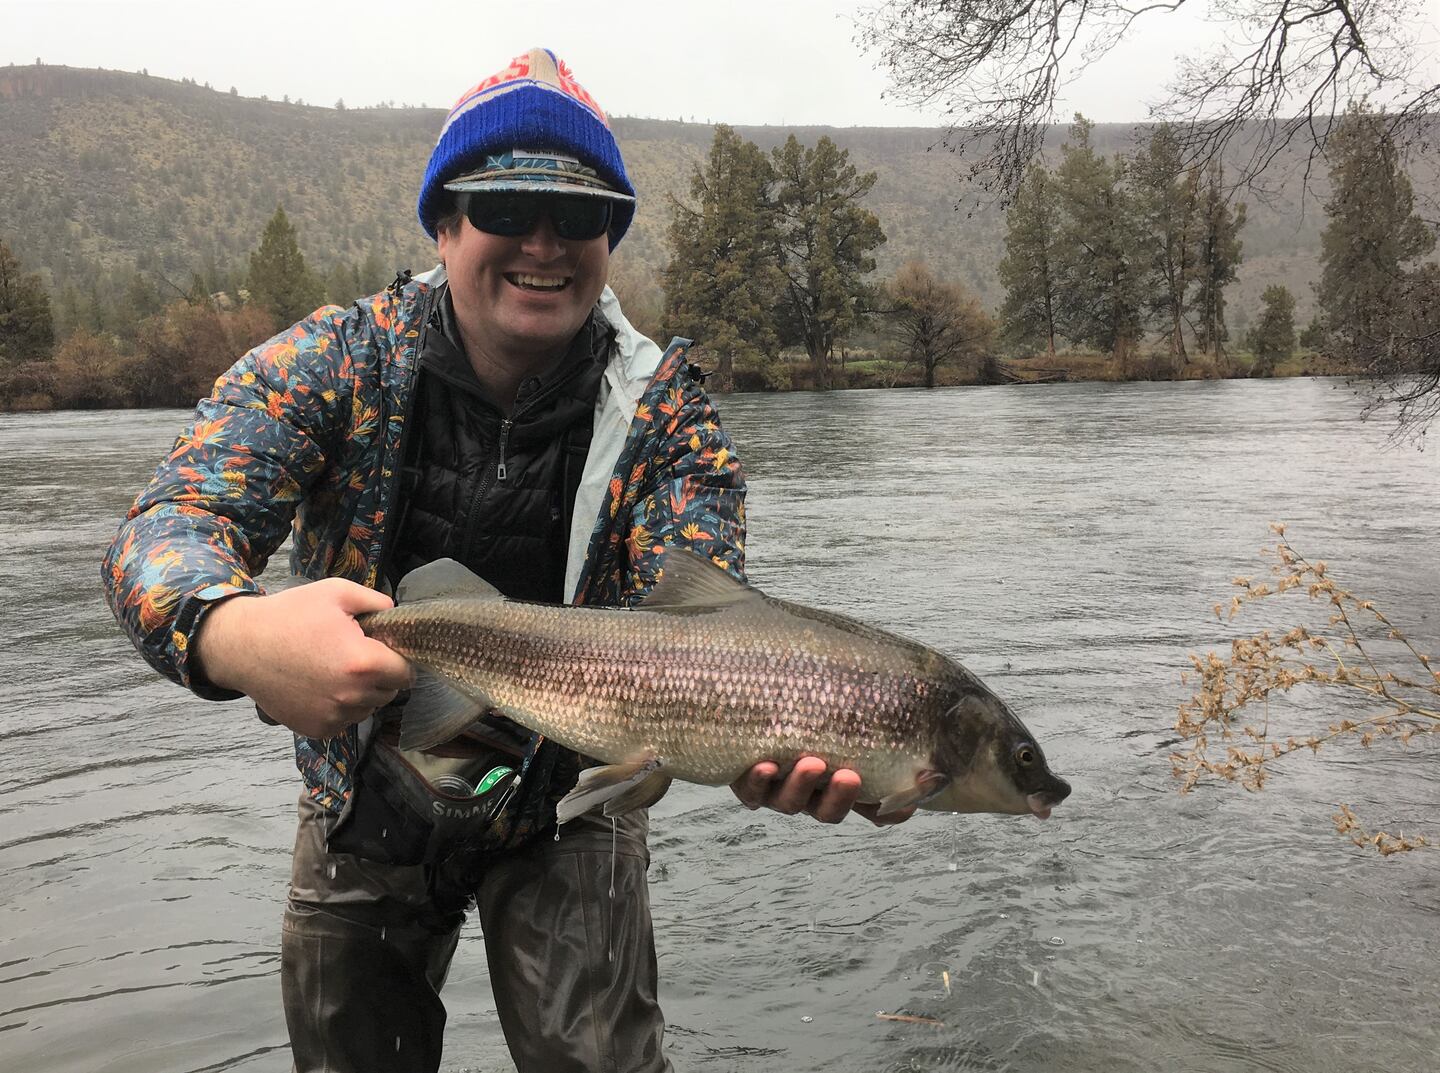 Oregon fisherman catches record-sized fish on Deschutes river - OPB